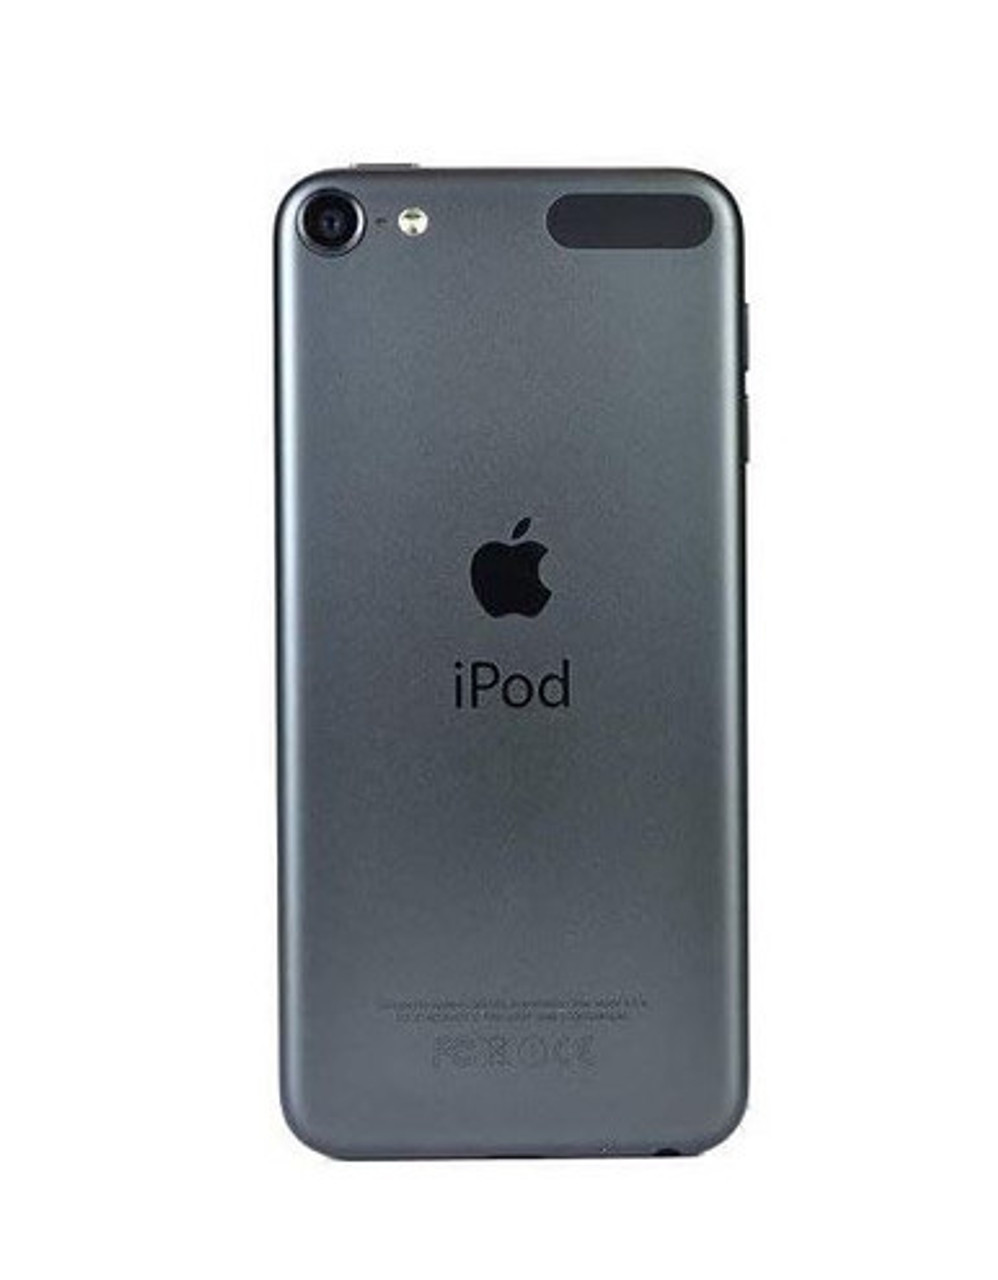 Apple iPod Touch 6th Generation 16GB Space Grey